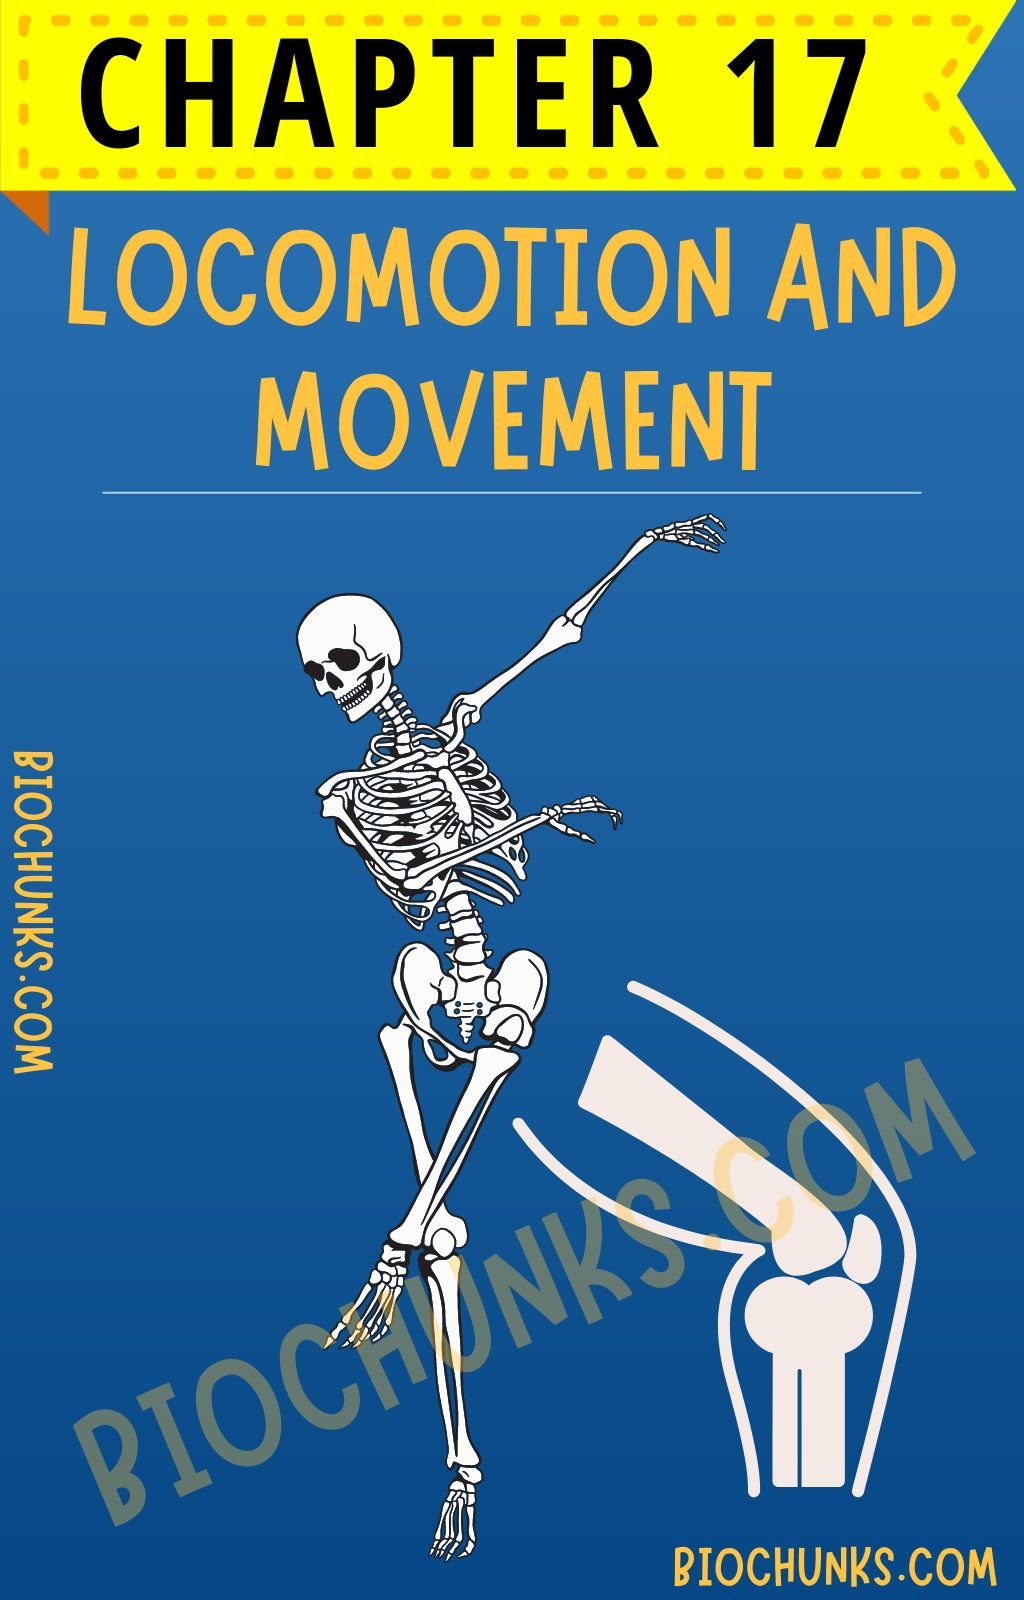 Locomotion and Movement Chapter 17 Class 11th biochunks.com